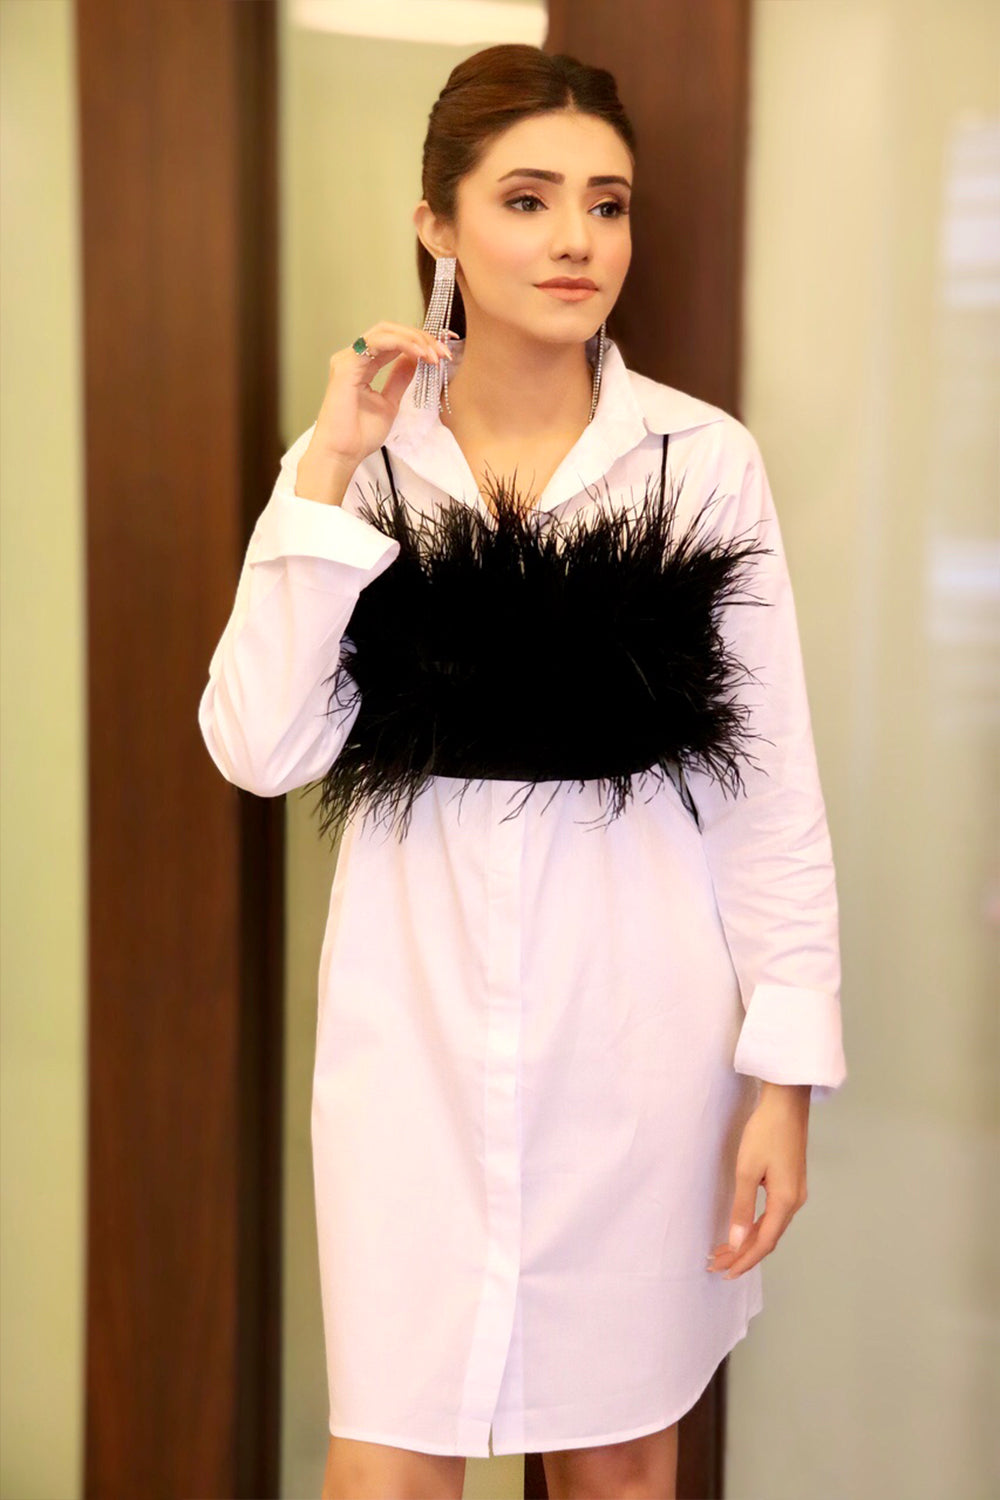 Geetika Verma In Bloom White Cotton Shirt Dress With Black Feather Crop Top